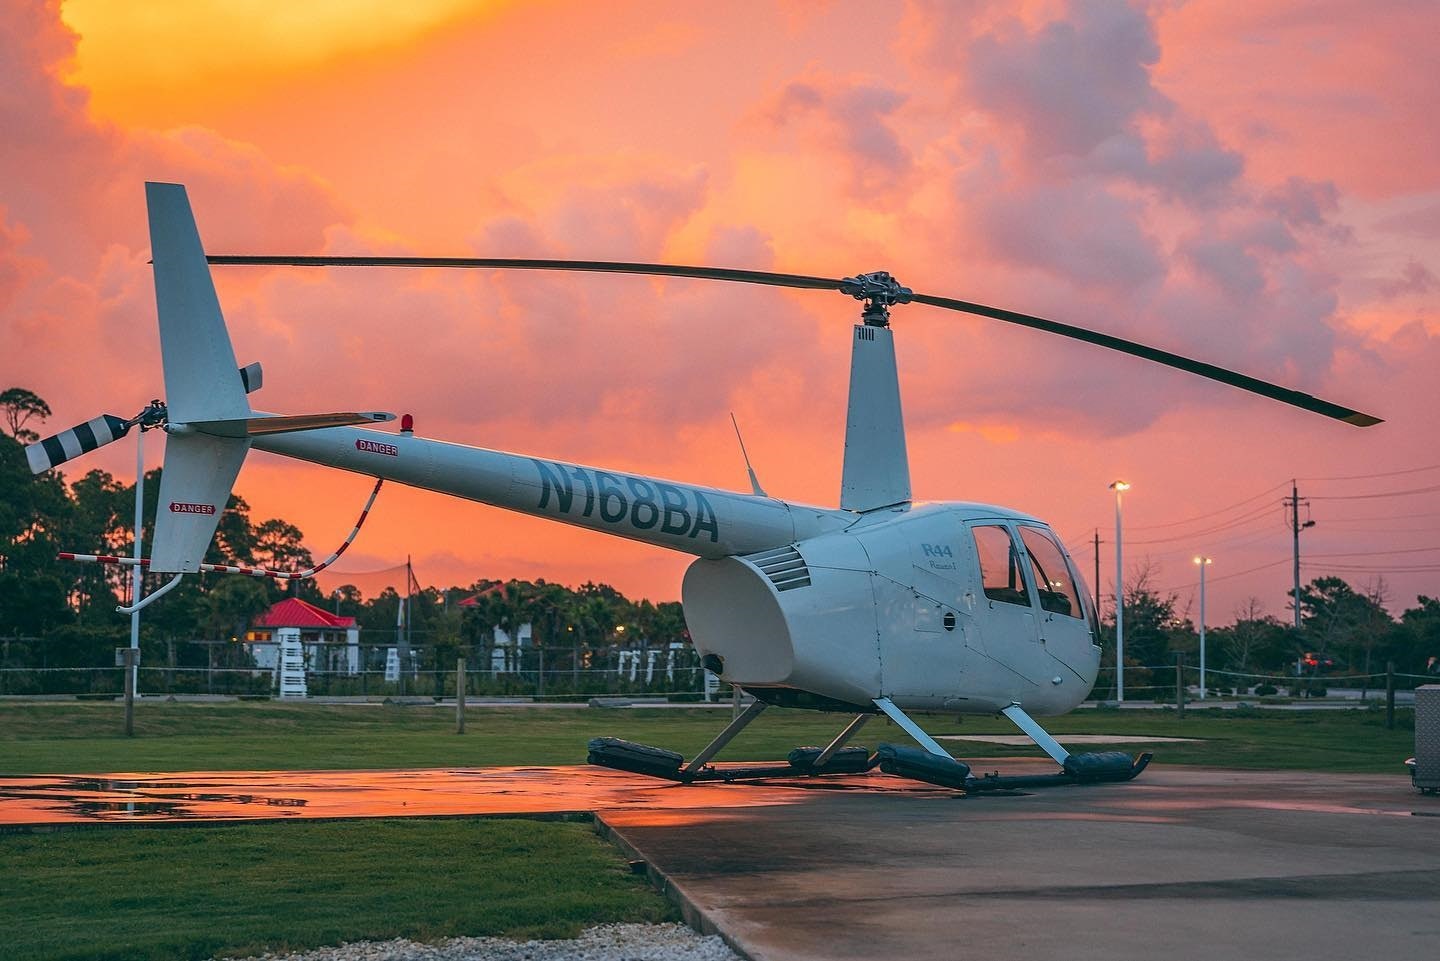 A white helicopter sits on the ground ready to be boarded in front of a pink sunset sky